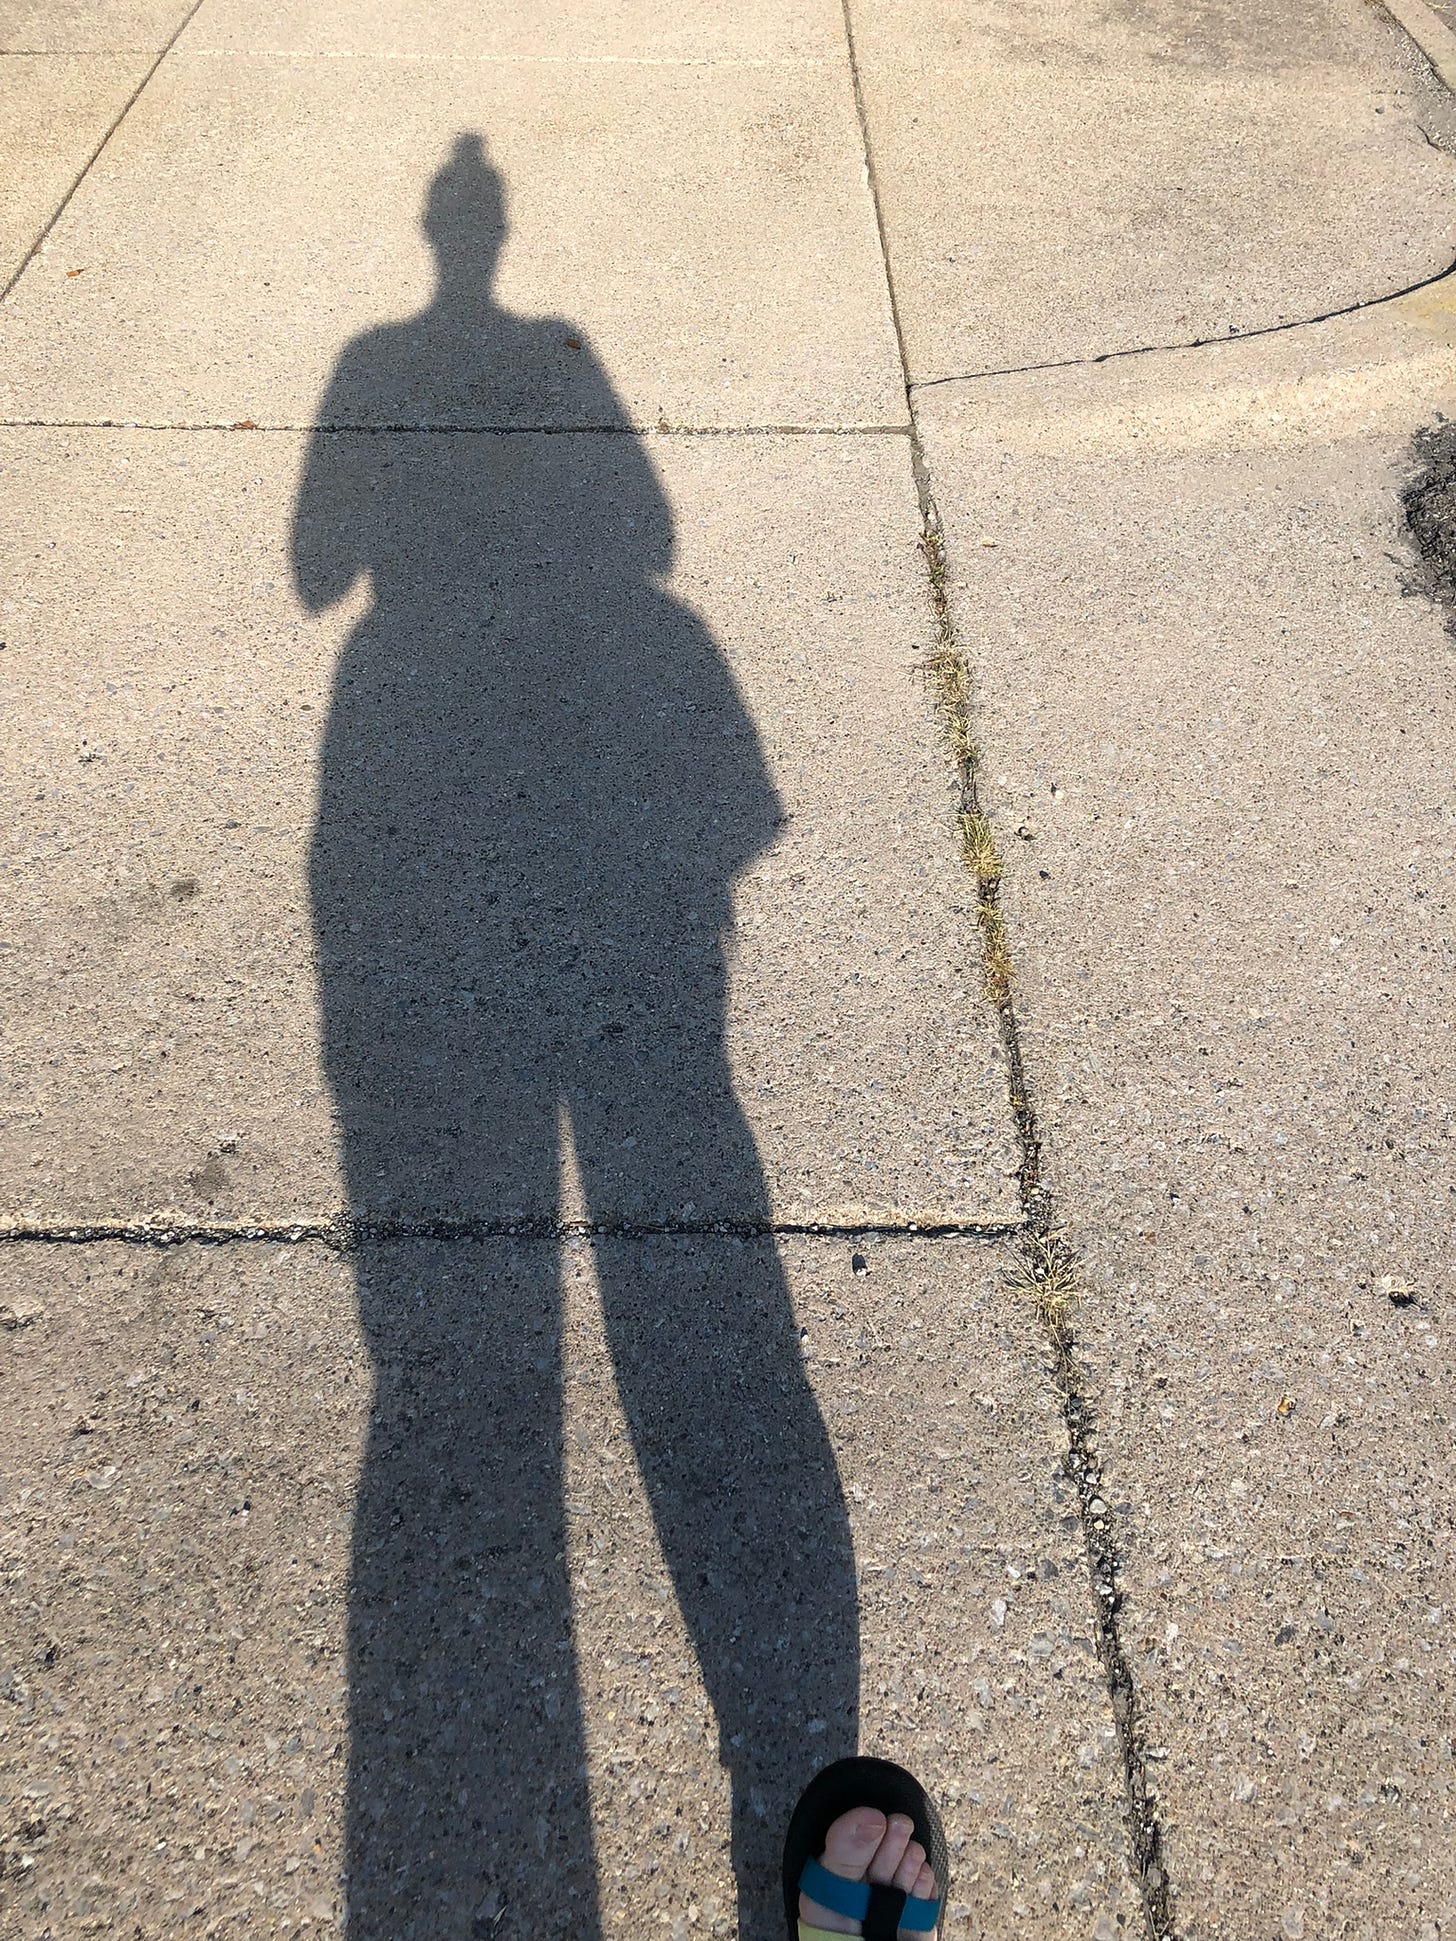 the shadow of a person elongated onto a segmented sidewalk